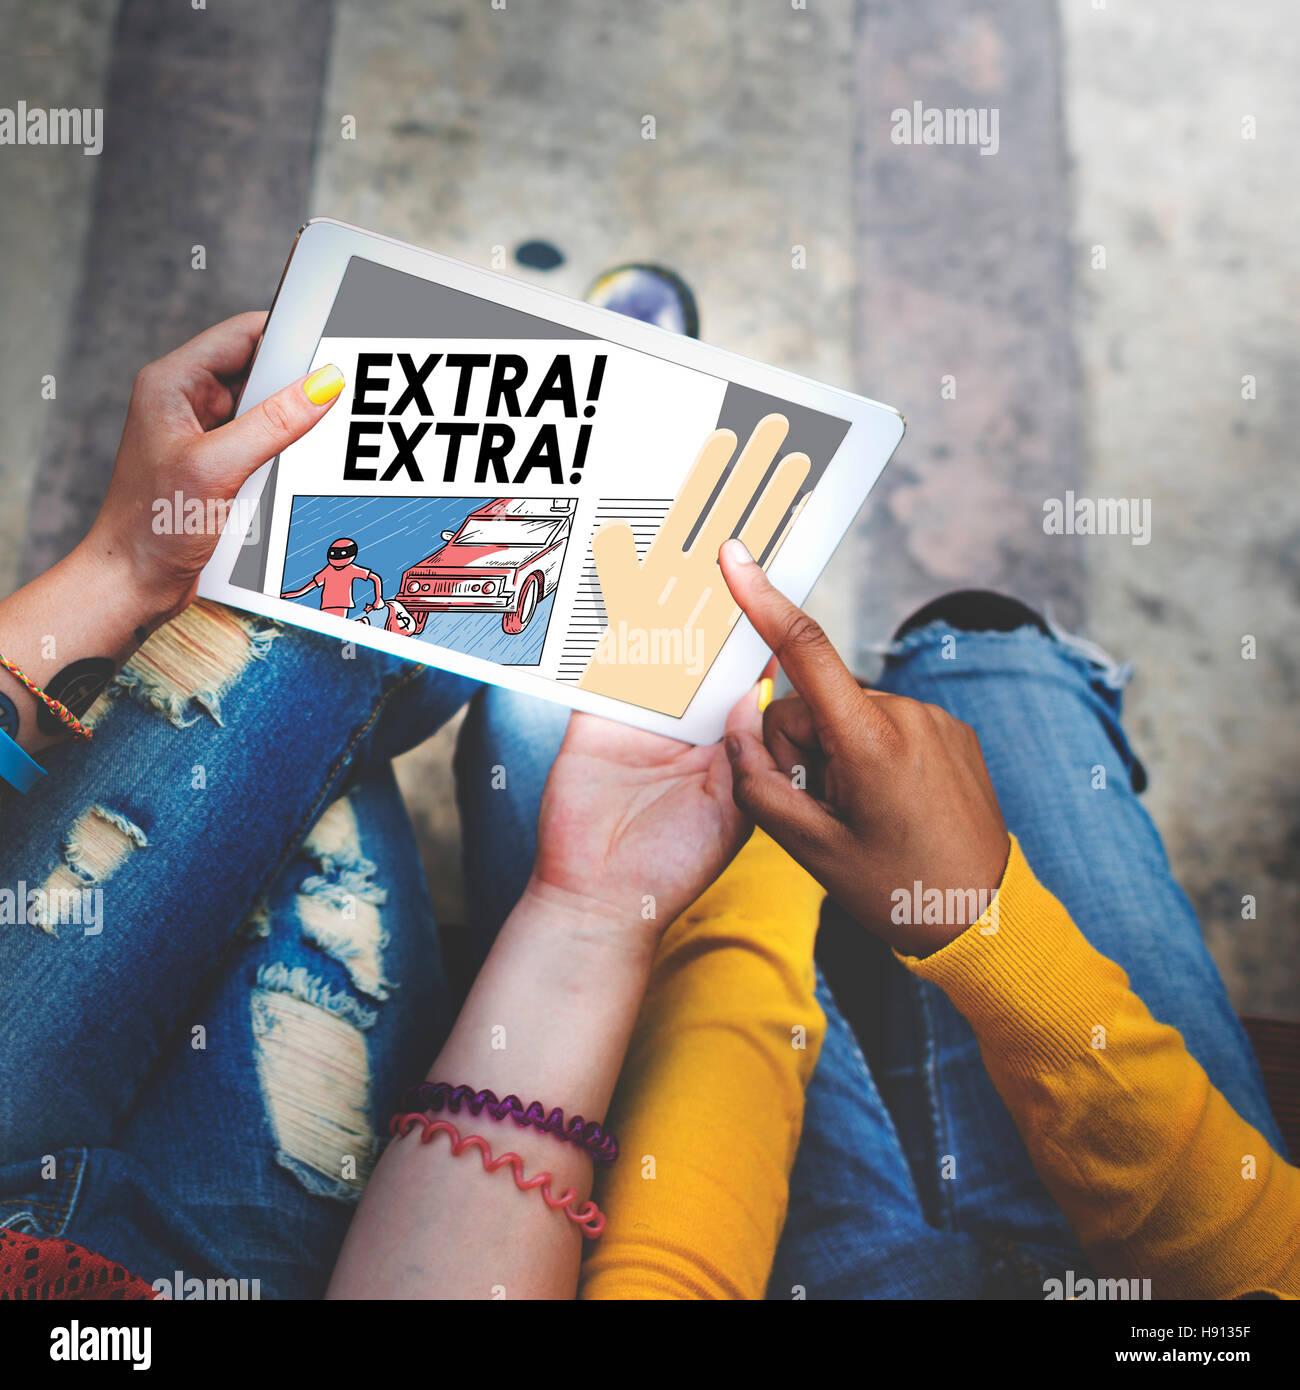 Extra Above High Motivation Urgency Newspaper Concept Stock Photo